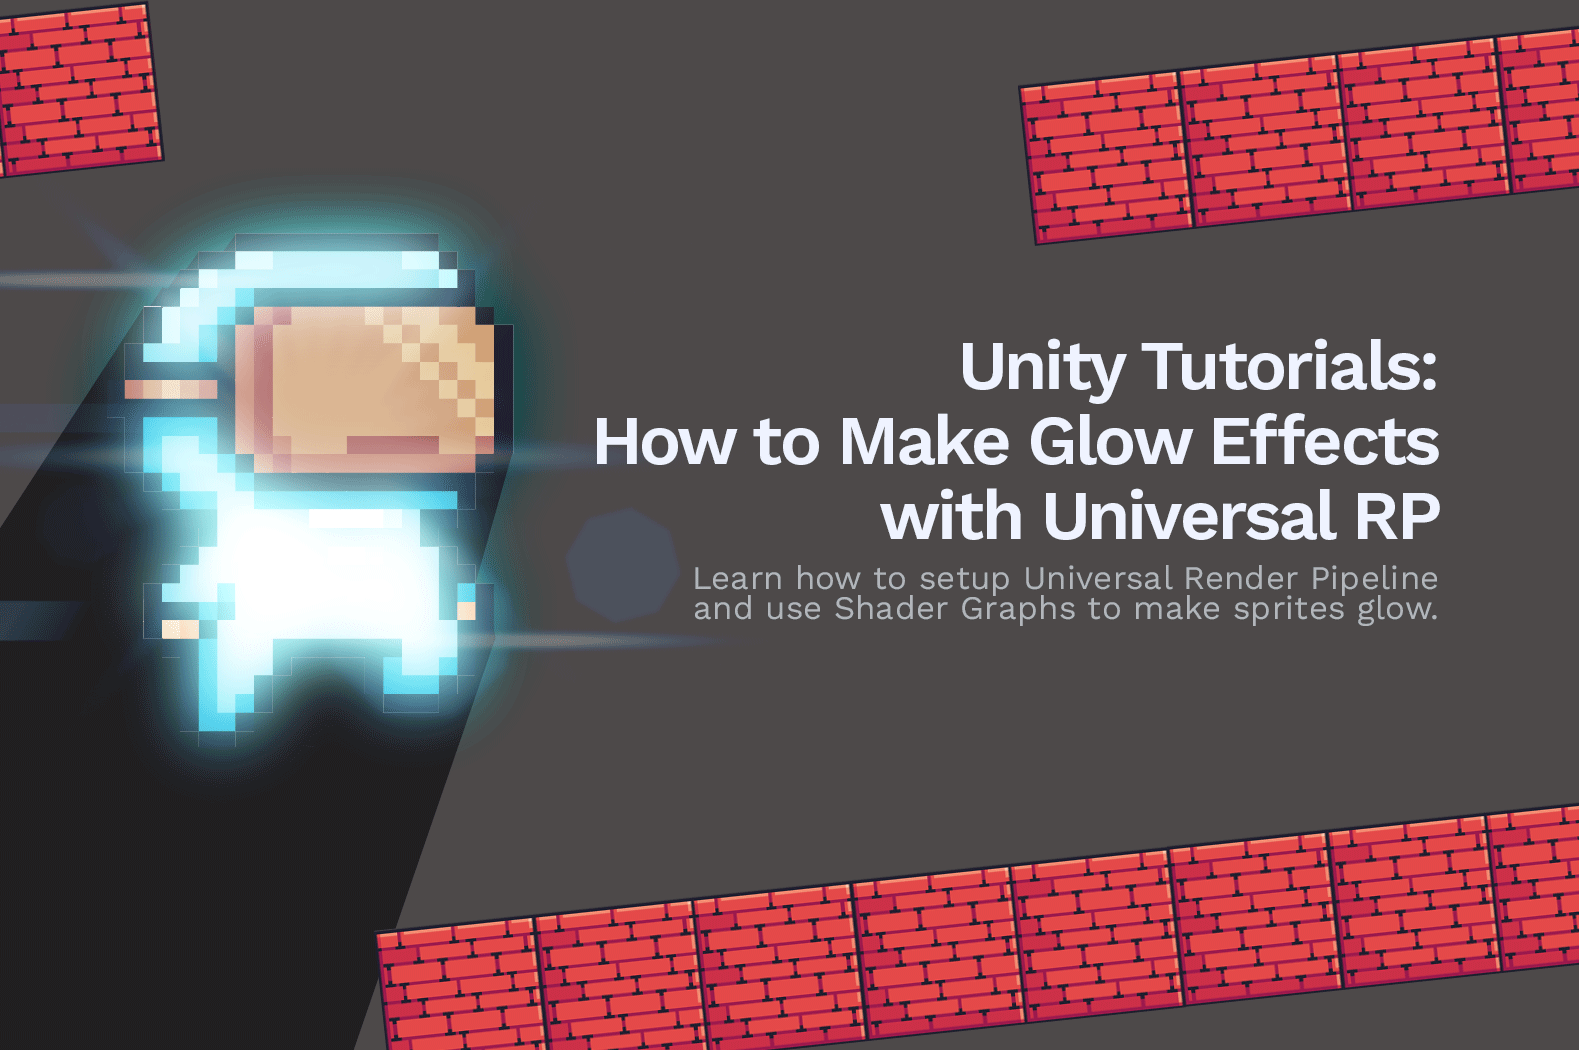 Unity Tutorials: How to Make Glow Effects in 2D